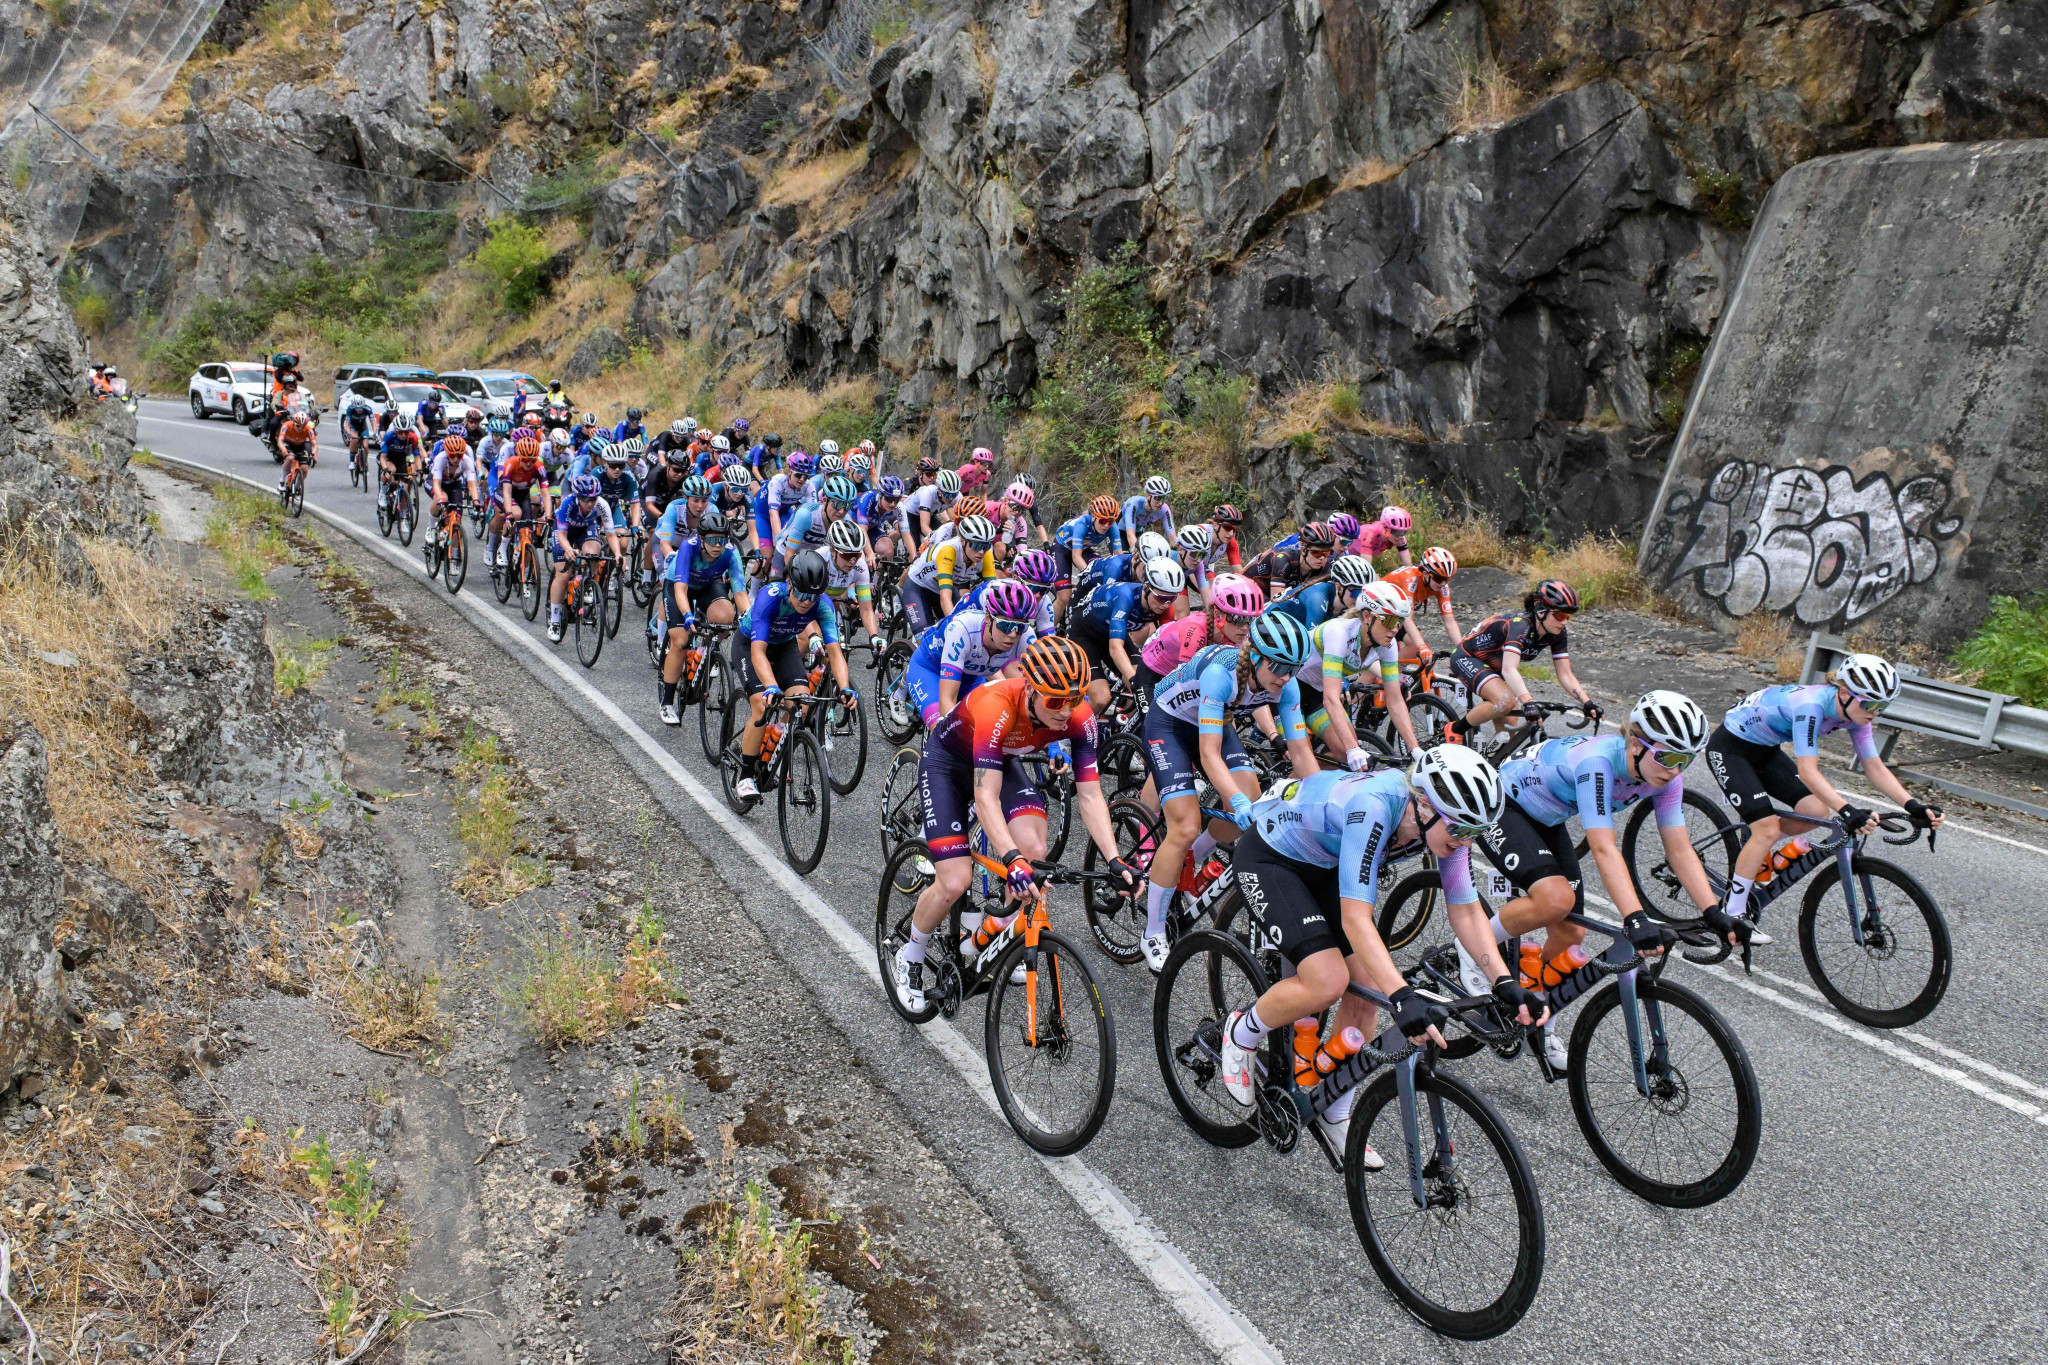 UCI announces creation of second division of women’s professional cycling teams